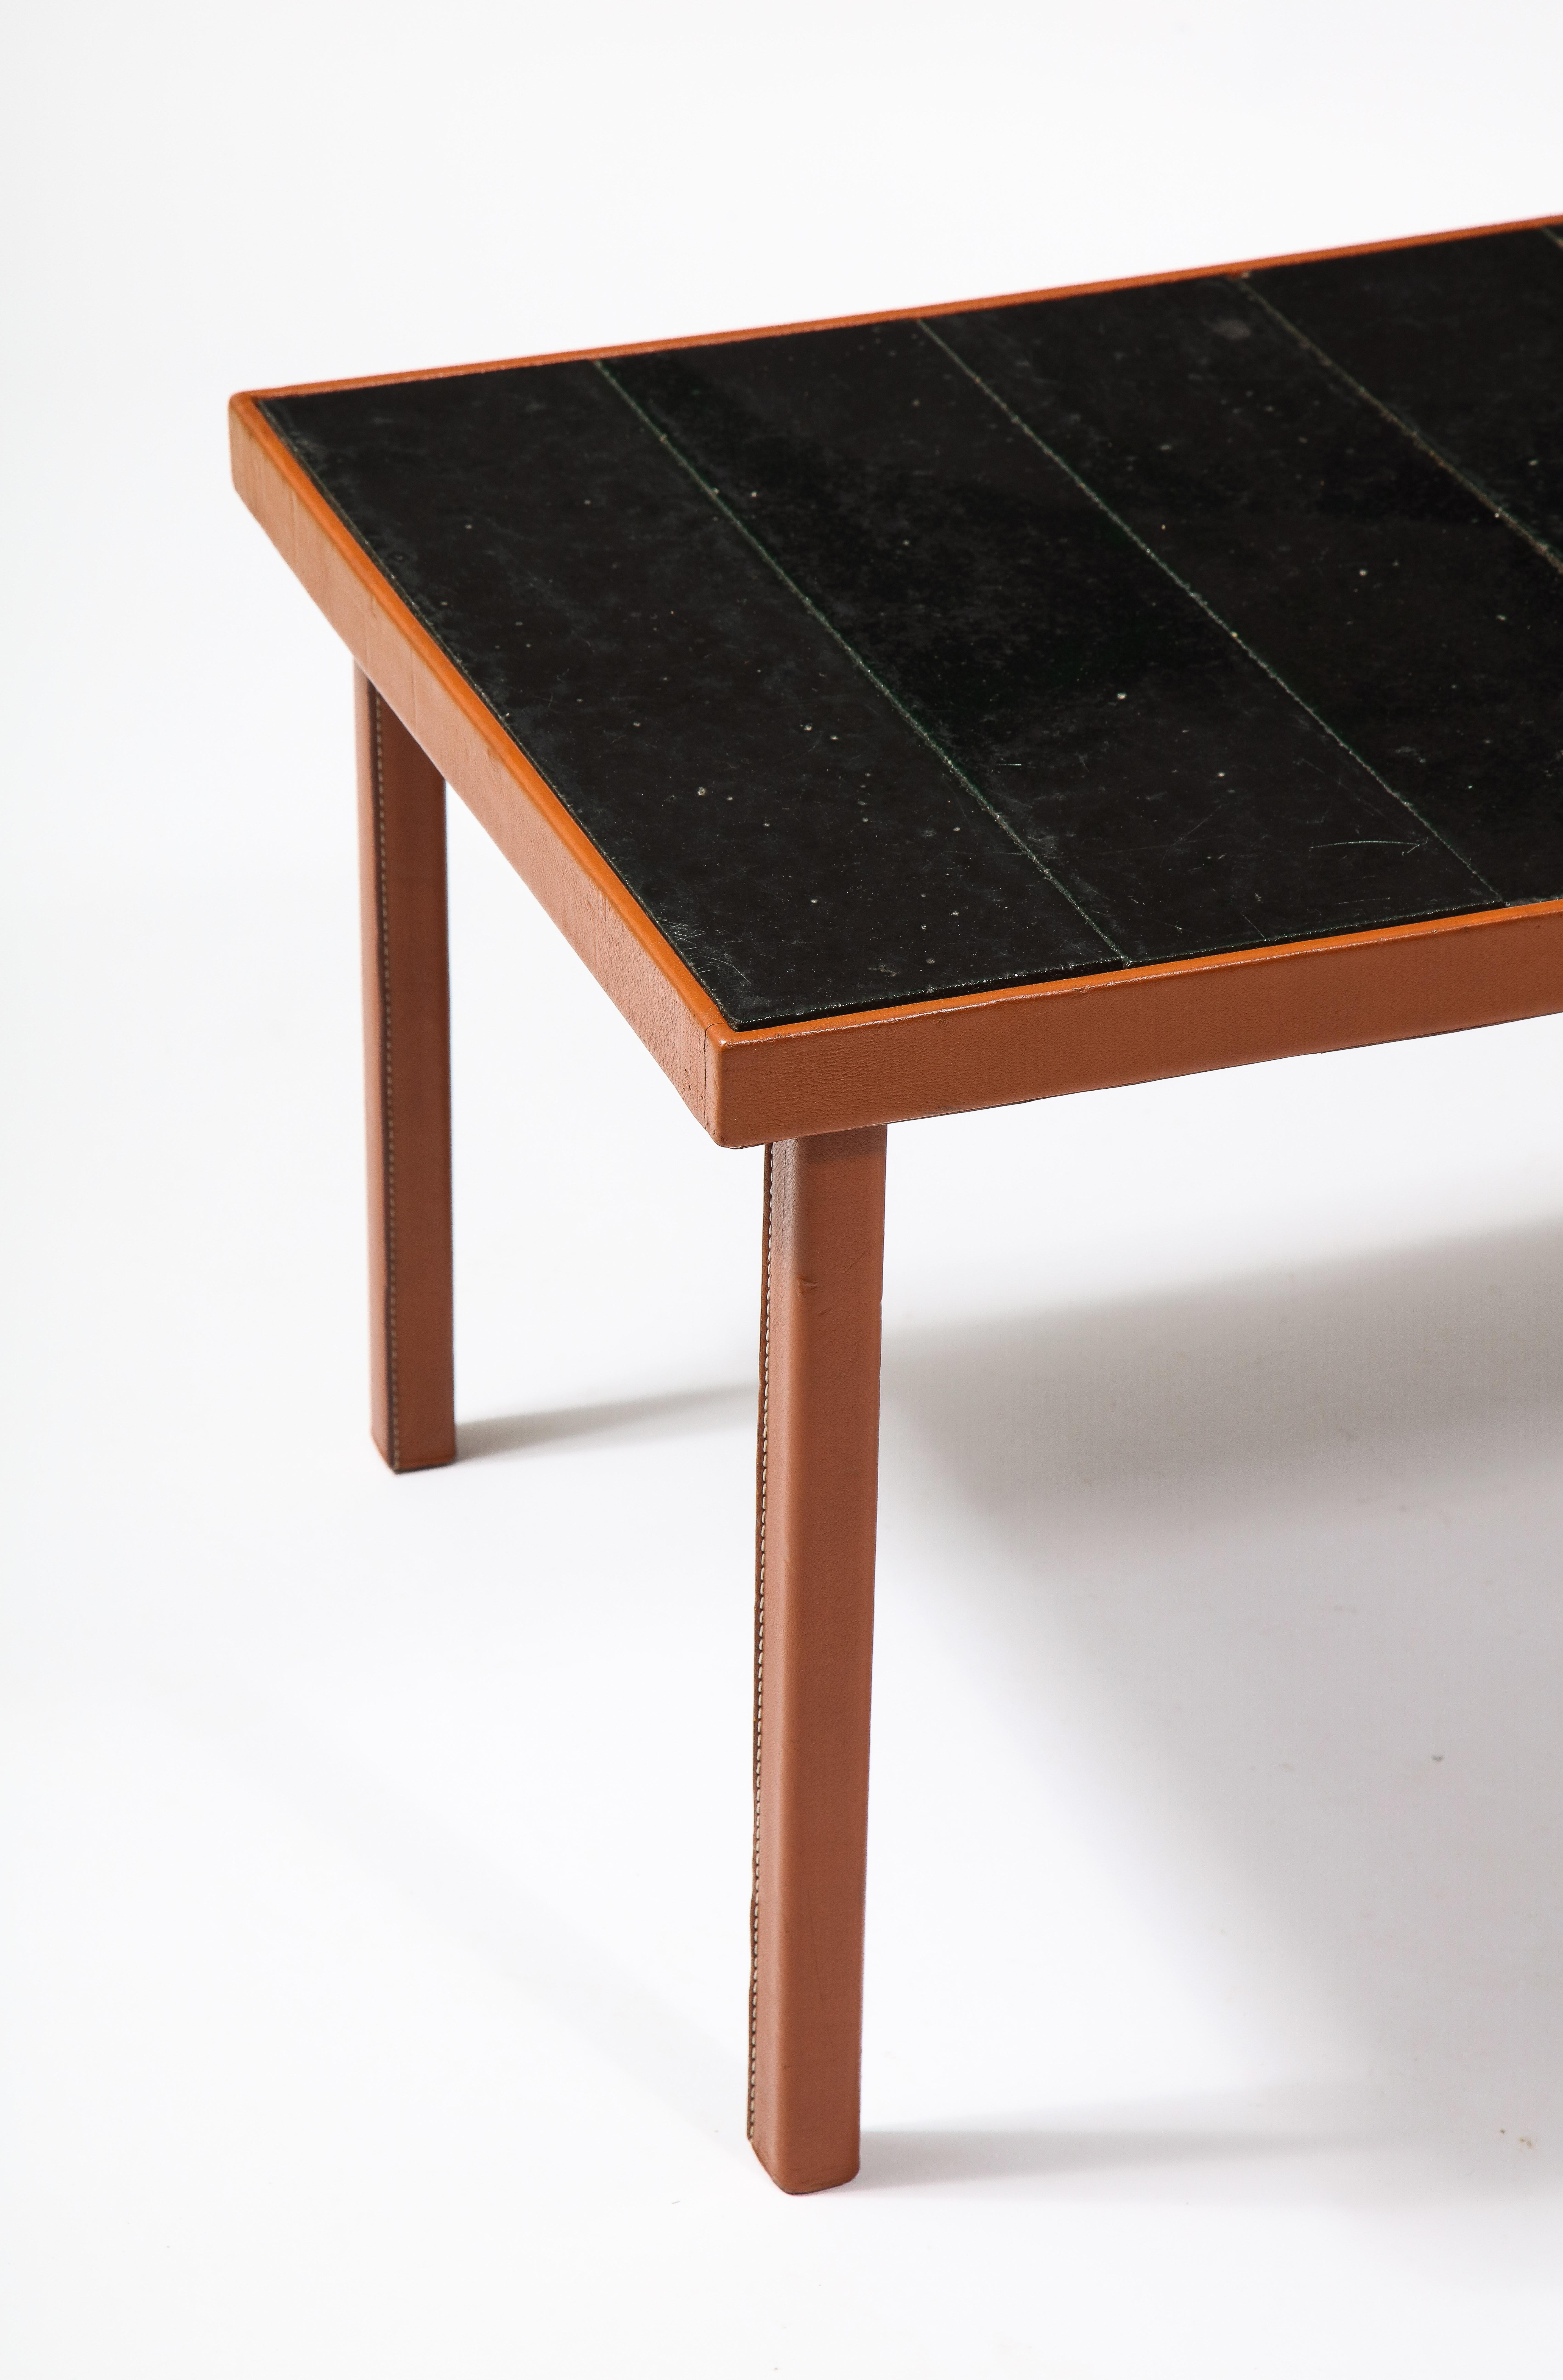 Adnet Style Leather & Dark Jouve Style Lava Stone Tiles Table, France 1950's For Sale 2